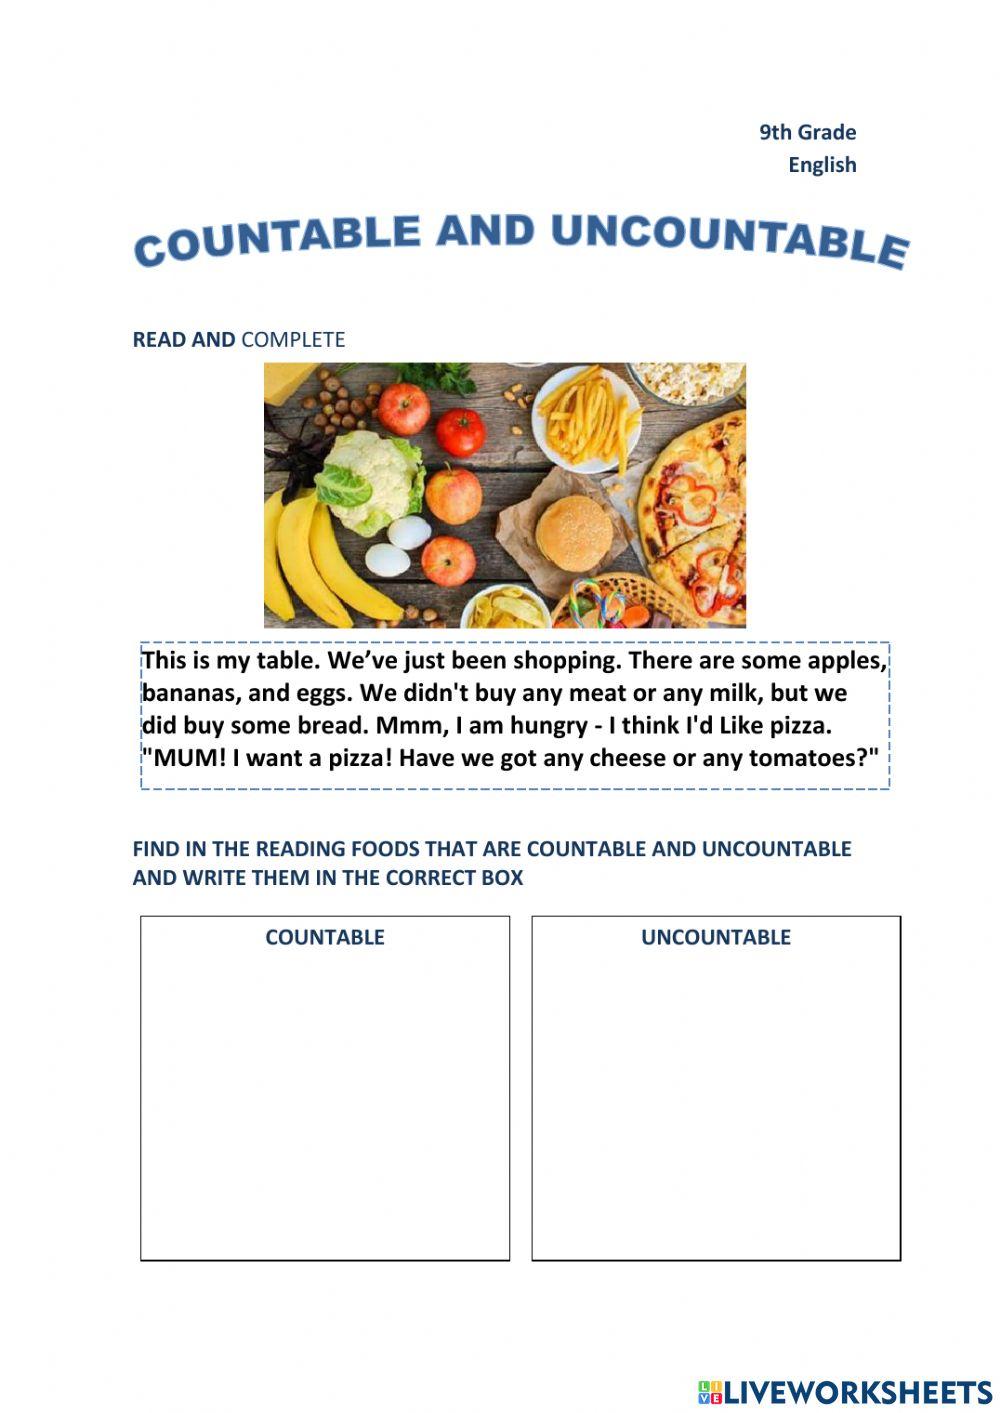 Countable and uncountable